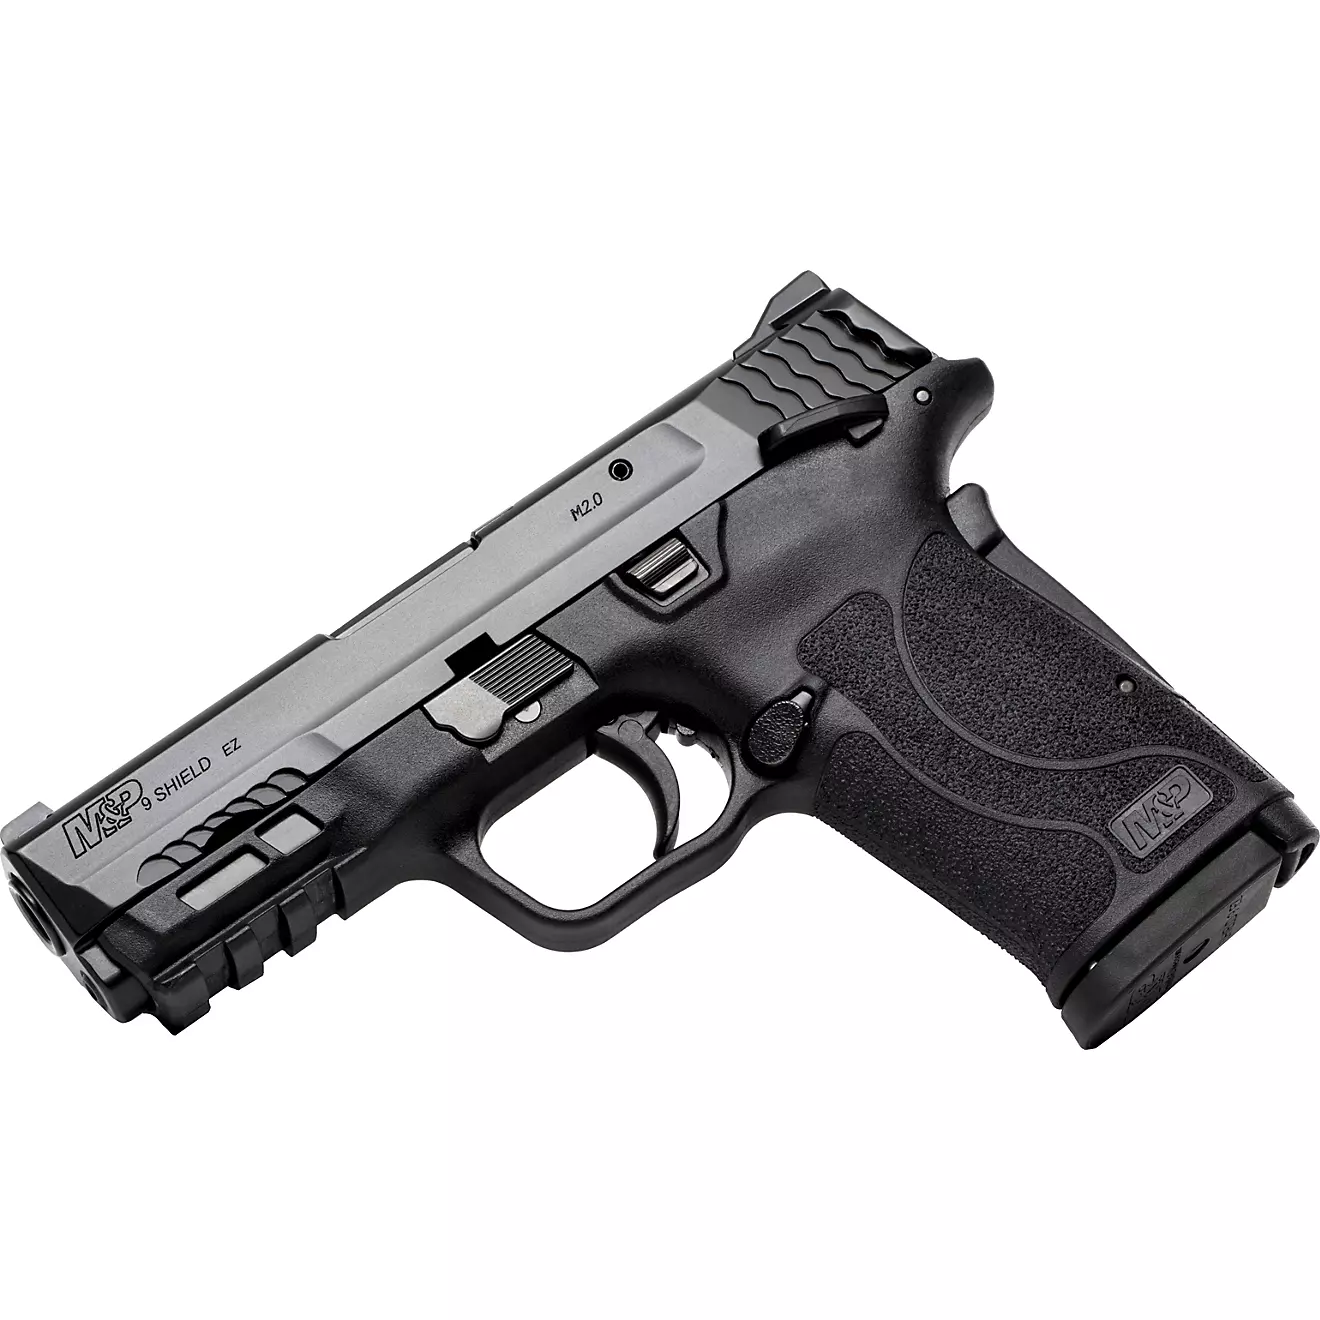 Smith & Wesson M&P9 Shield EZ 9mm Pistol w/ Thumb Safety